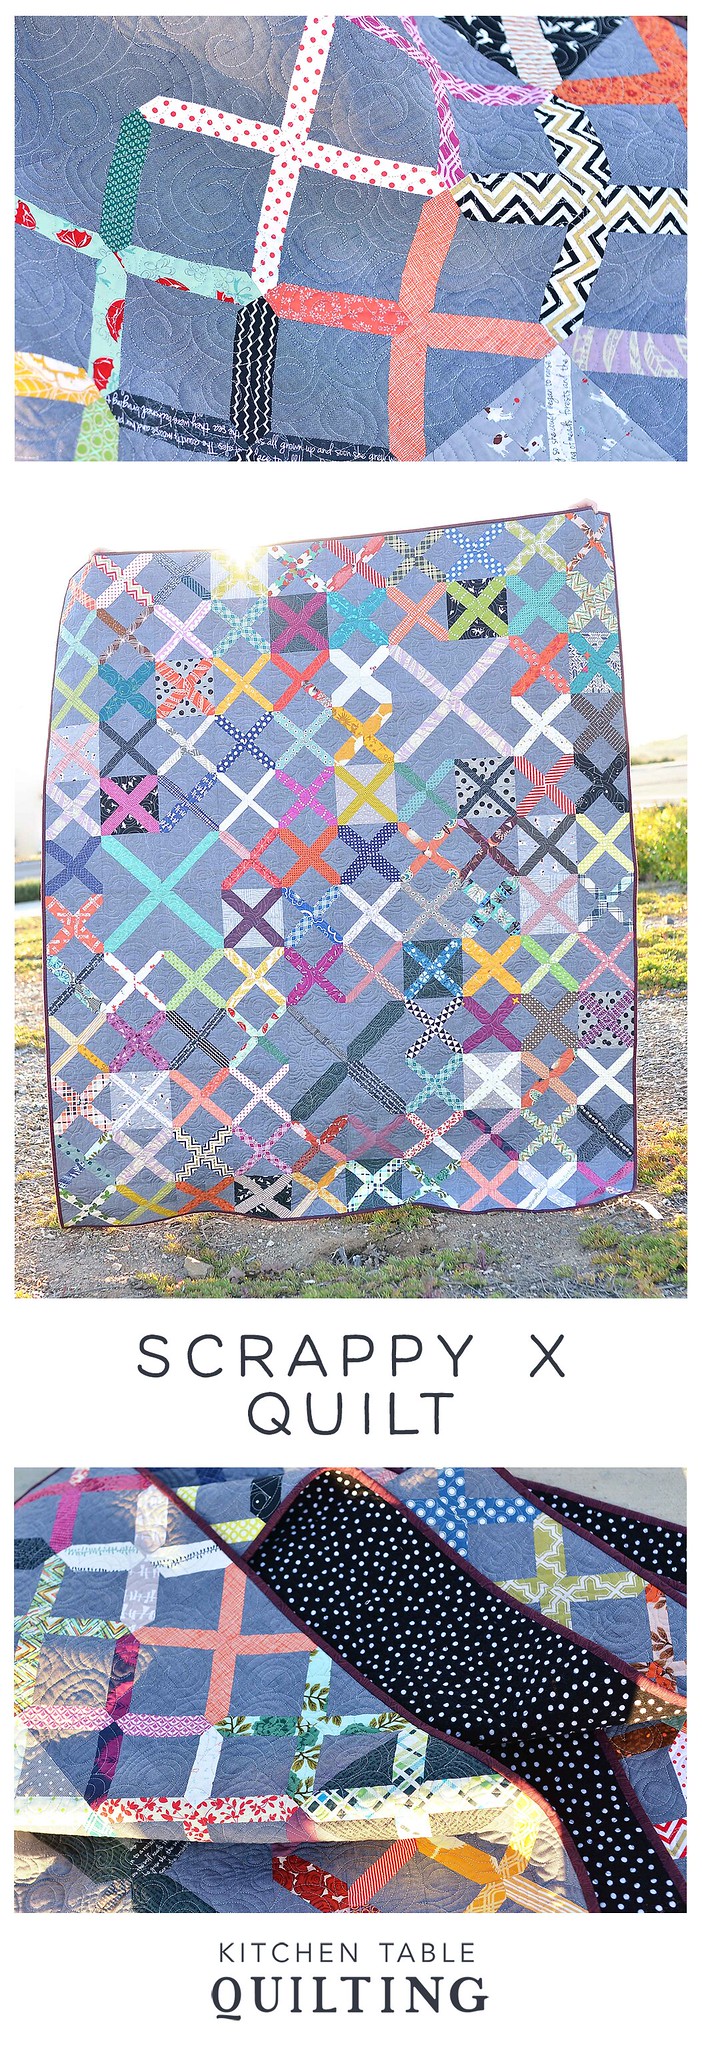 Scrappy X Lap Quilt - Kitchen Table Quilting